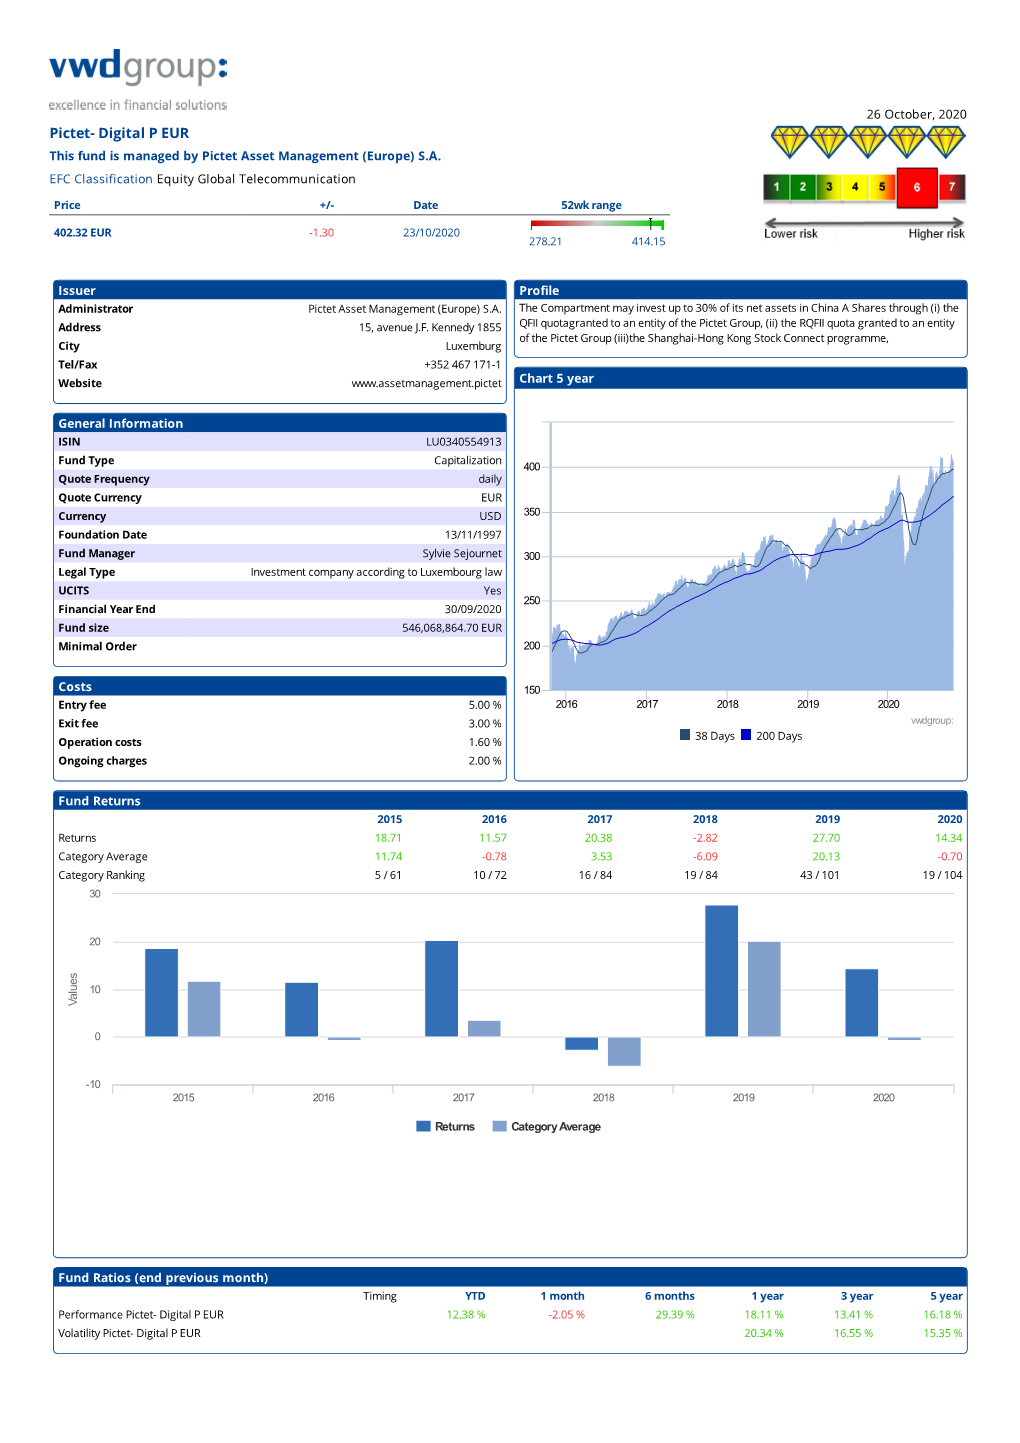 Pictet- Digital P EUR This Fund Is Managed by Pictet Asset Management (Europe) S.A